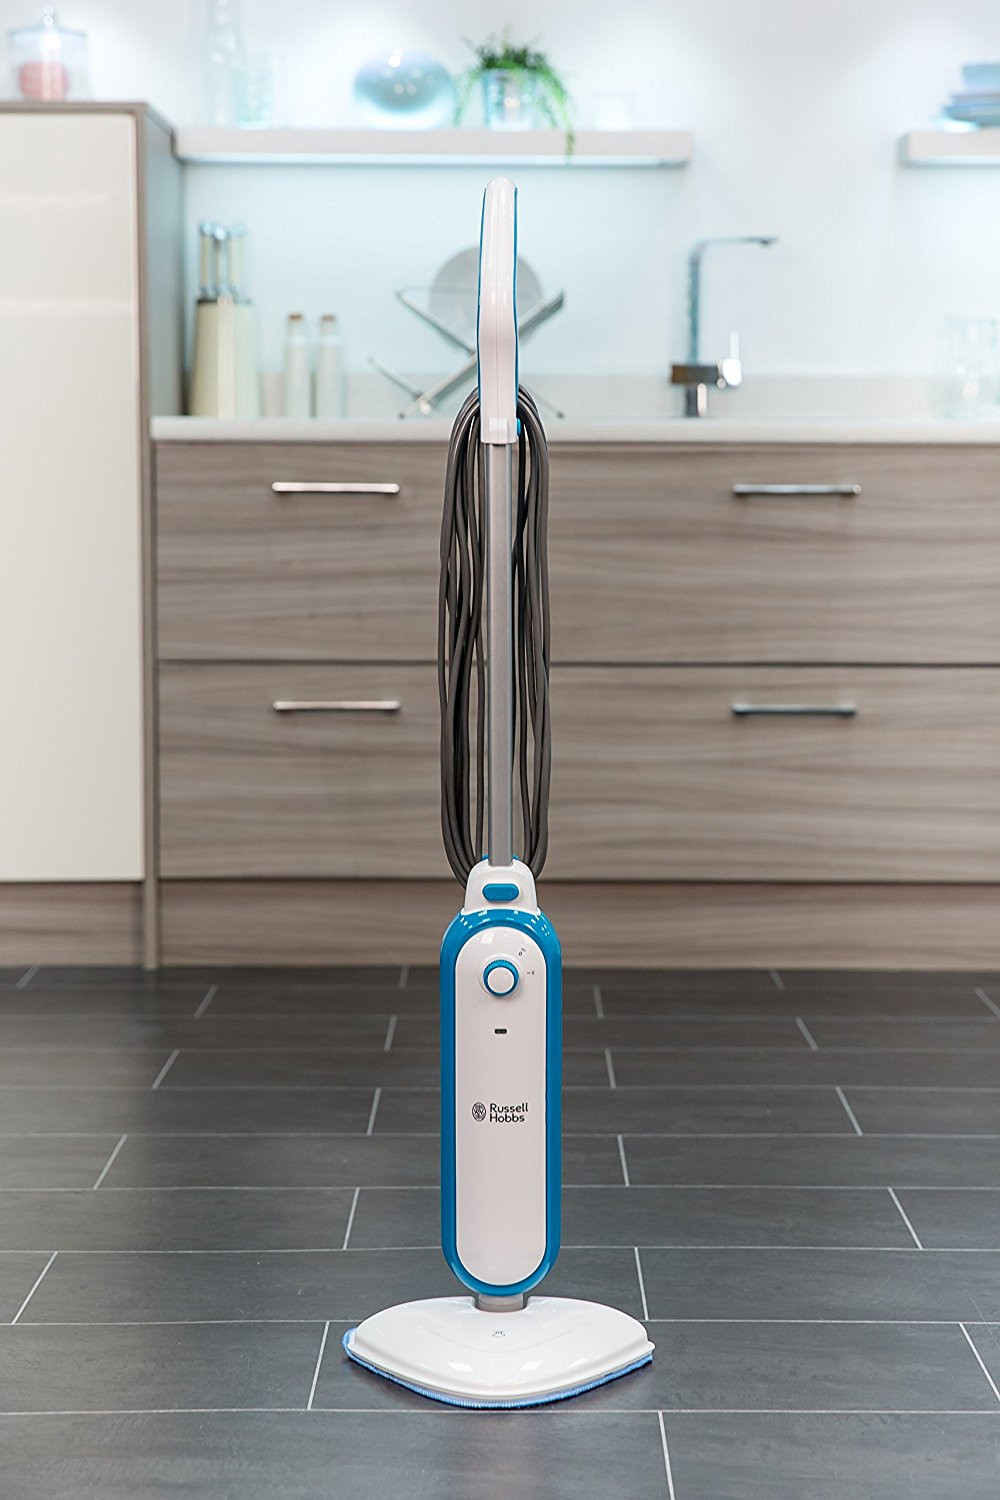 24 Famous Steam Cleaner for Hardwood Floors and Carpet 2024 free download steam cleaner for hardwood floors and carpet of russell hobbs rhsm1001 steam and clean steam mop white aqua free with regard to russell hobbs rhsm1001 steam and clean steam mop white aqua fr